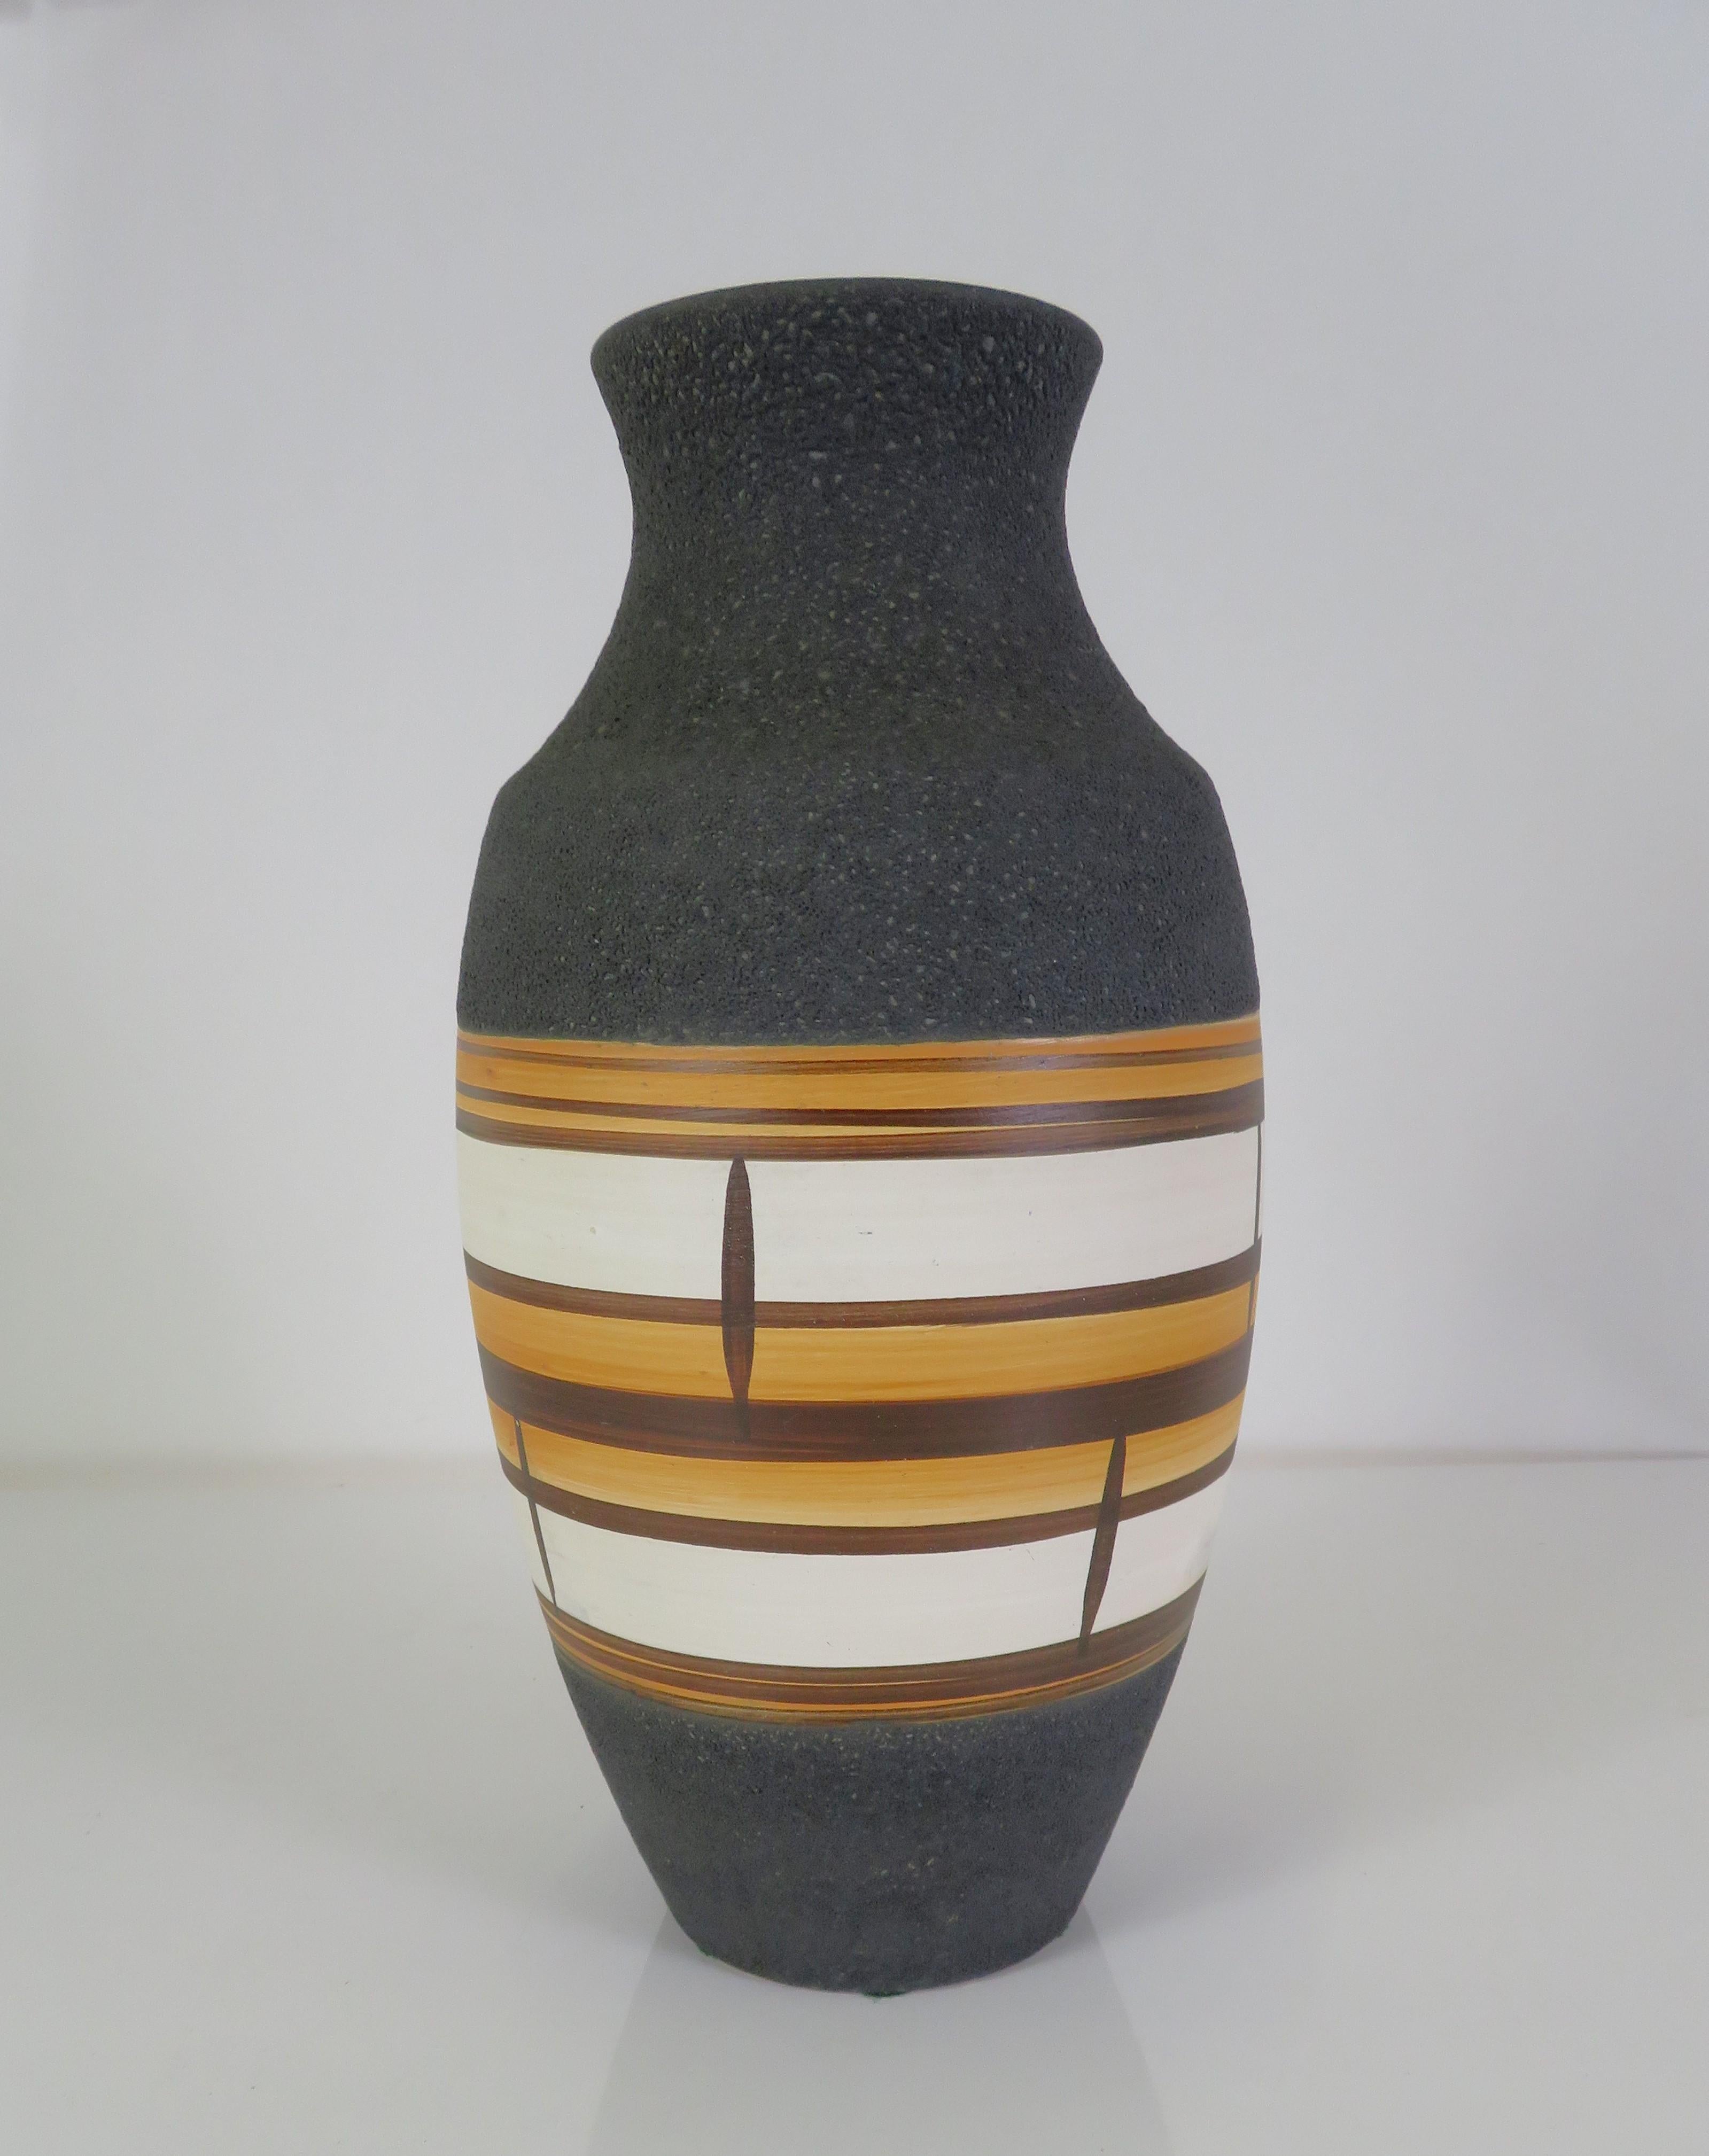 Tactile Modern Lava glaze vase from 1962 by German Bay Keramik. With its more traditional vase shape, a textured charcoal Lava glaze was used in the upper and lower portions of the vase with its center decorated with bands of yellow, brown and